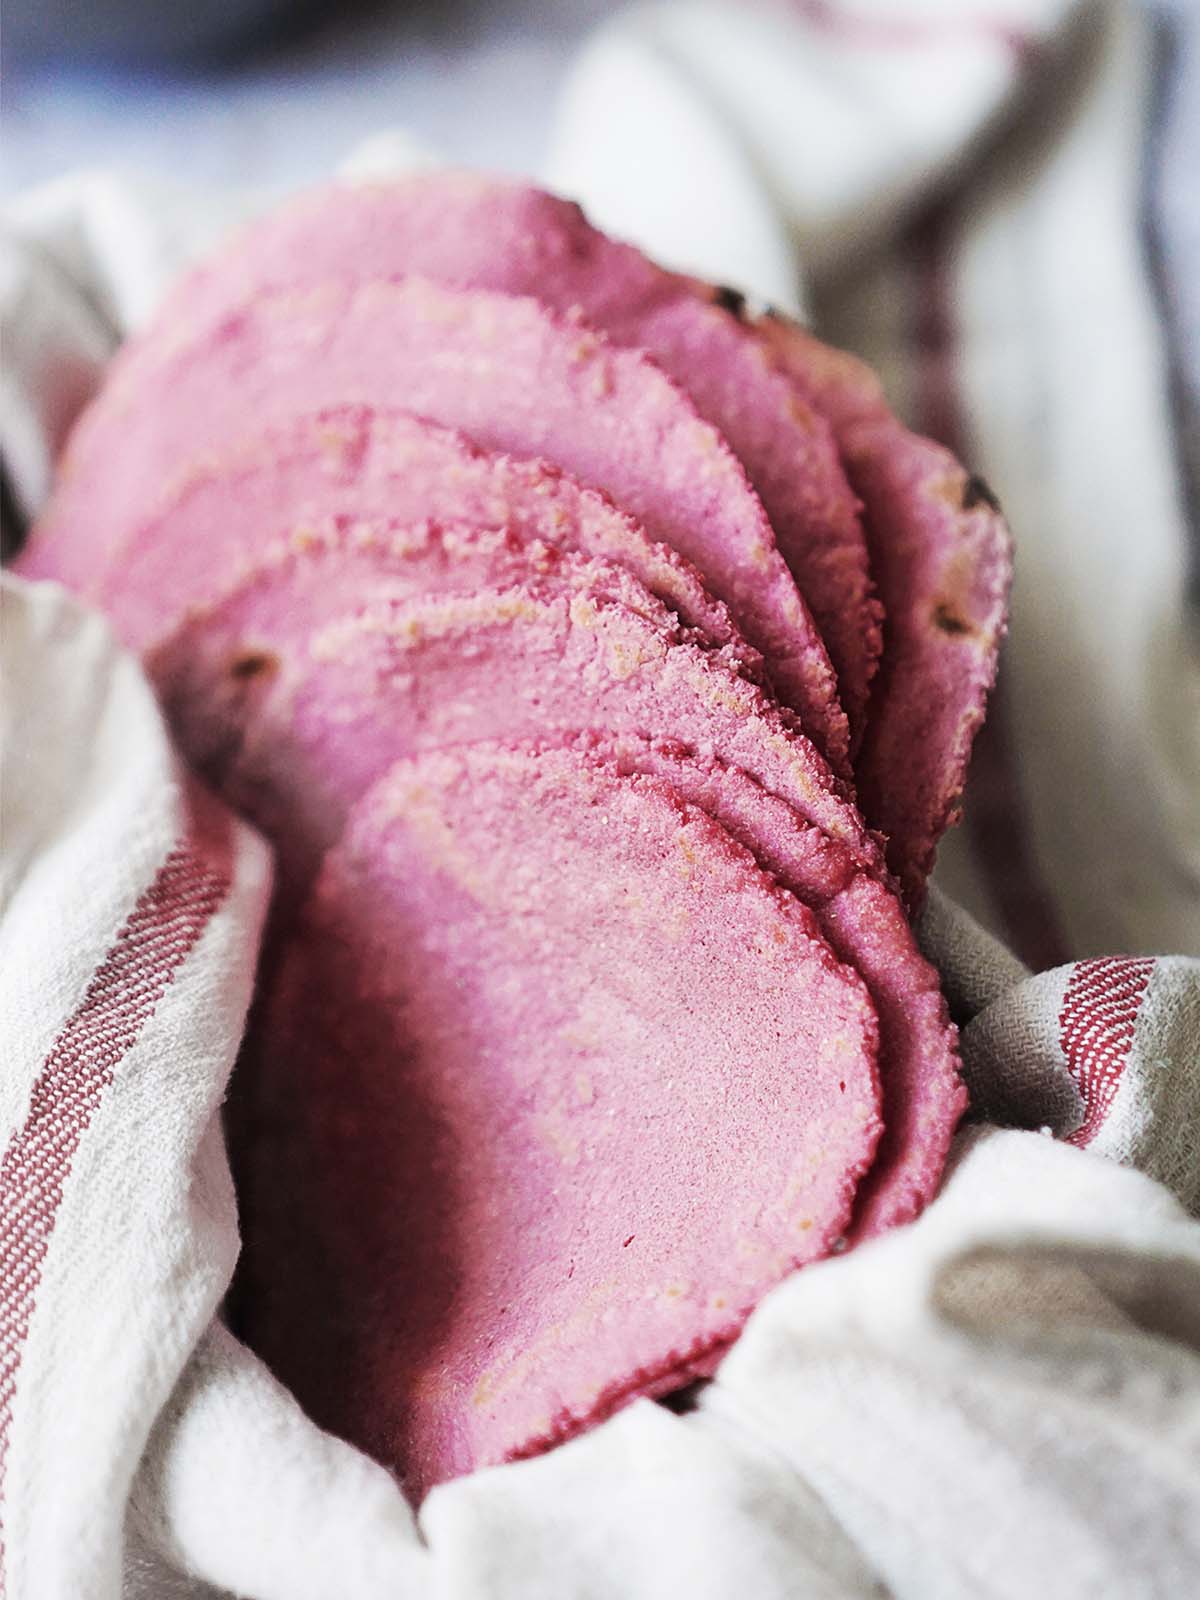 A stack of pink tortillas in a kitchen towel.